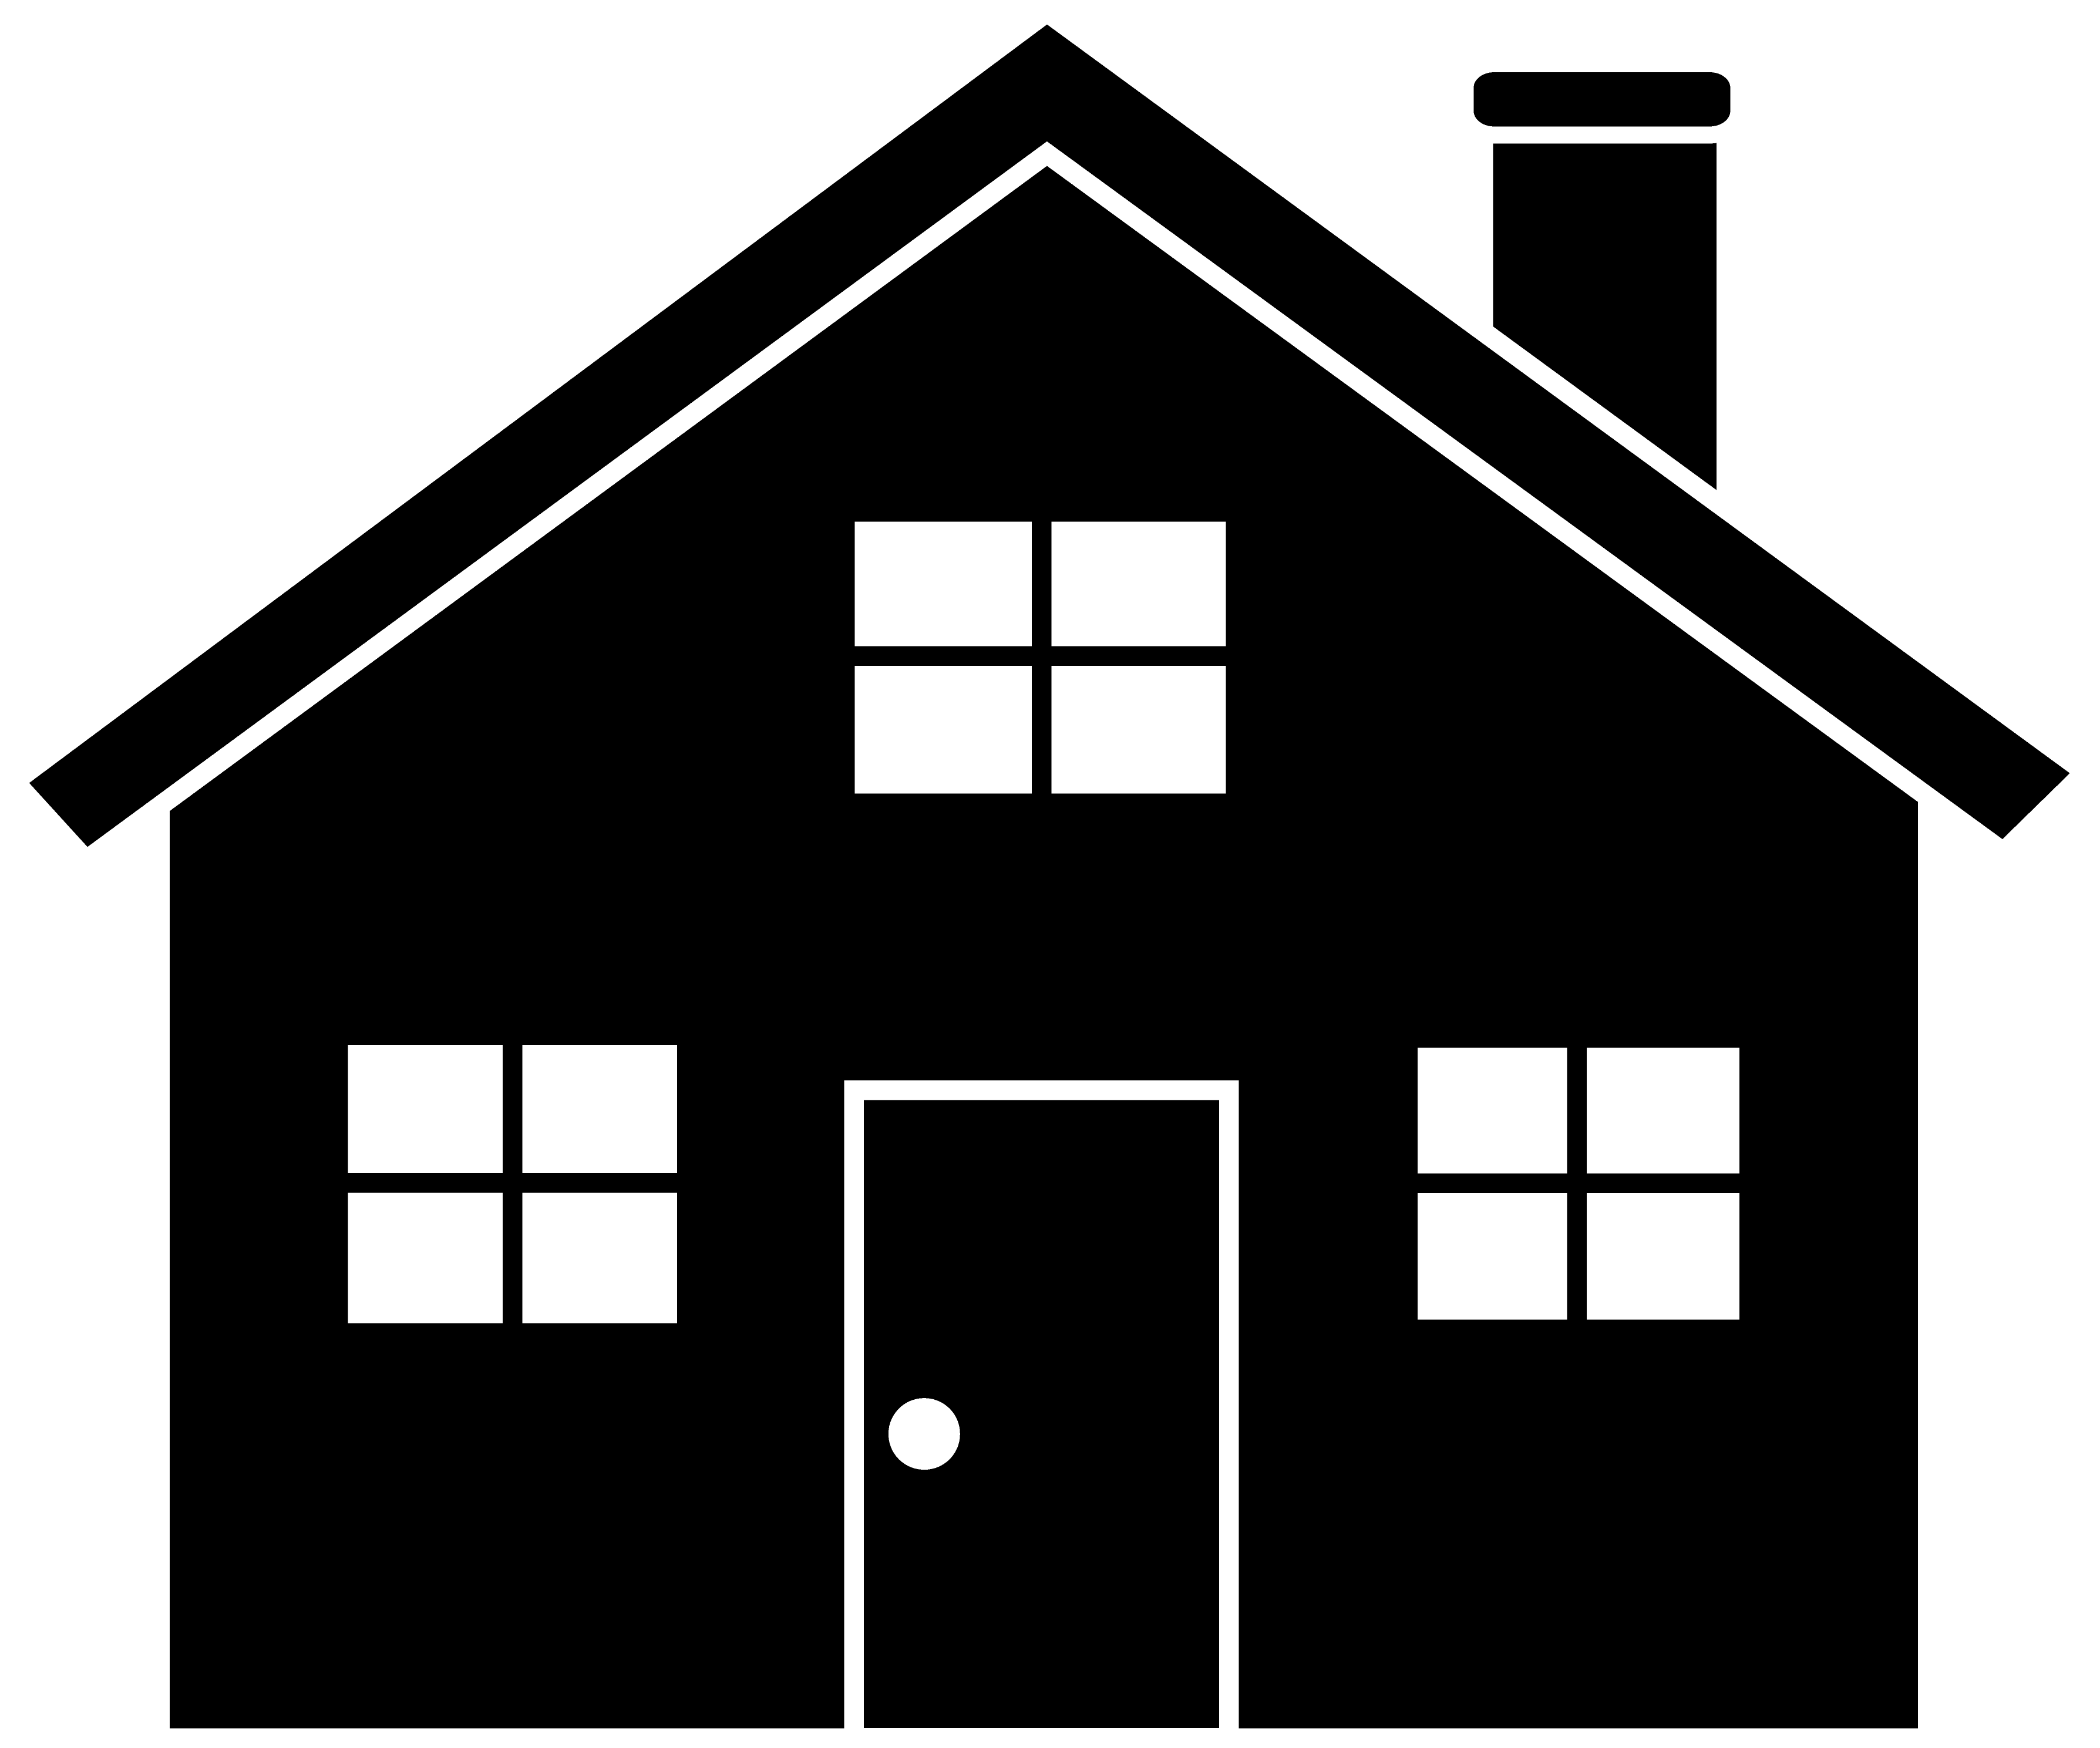 Home clipart. Image of house black